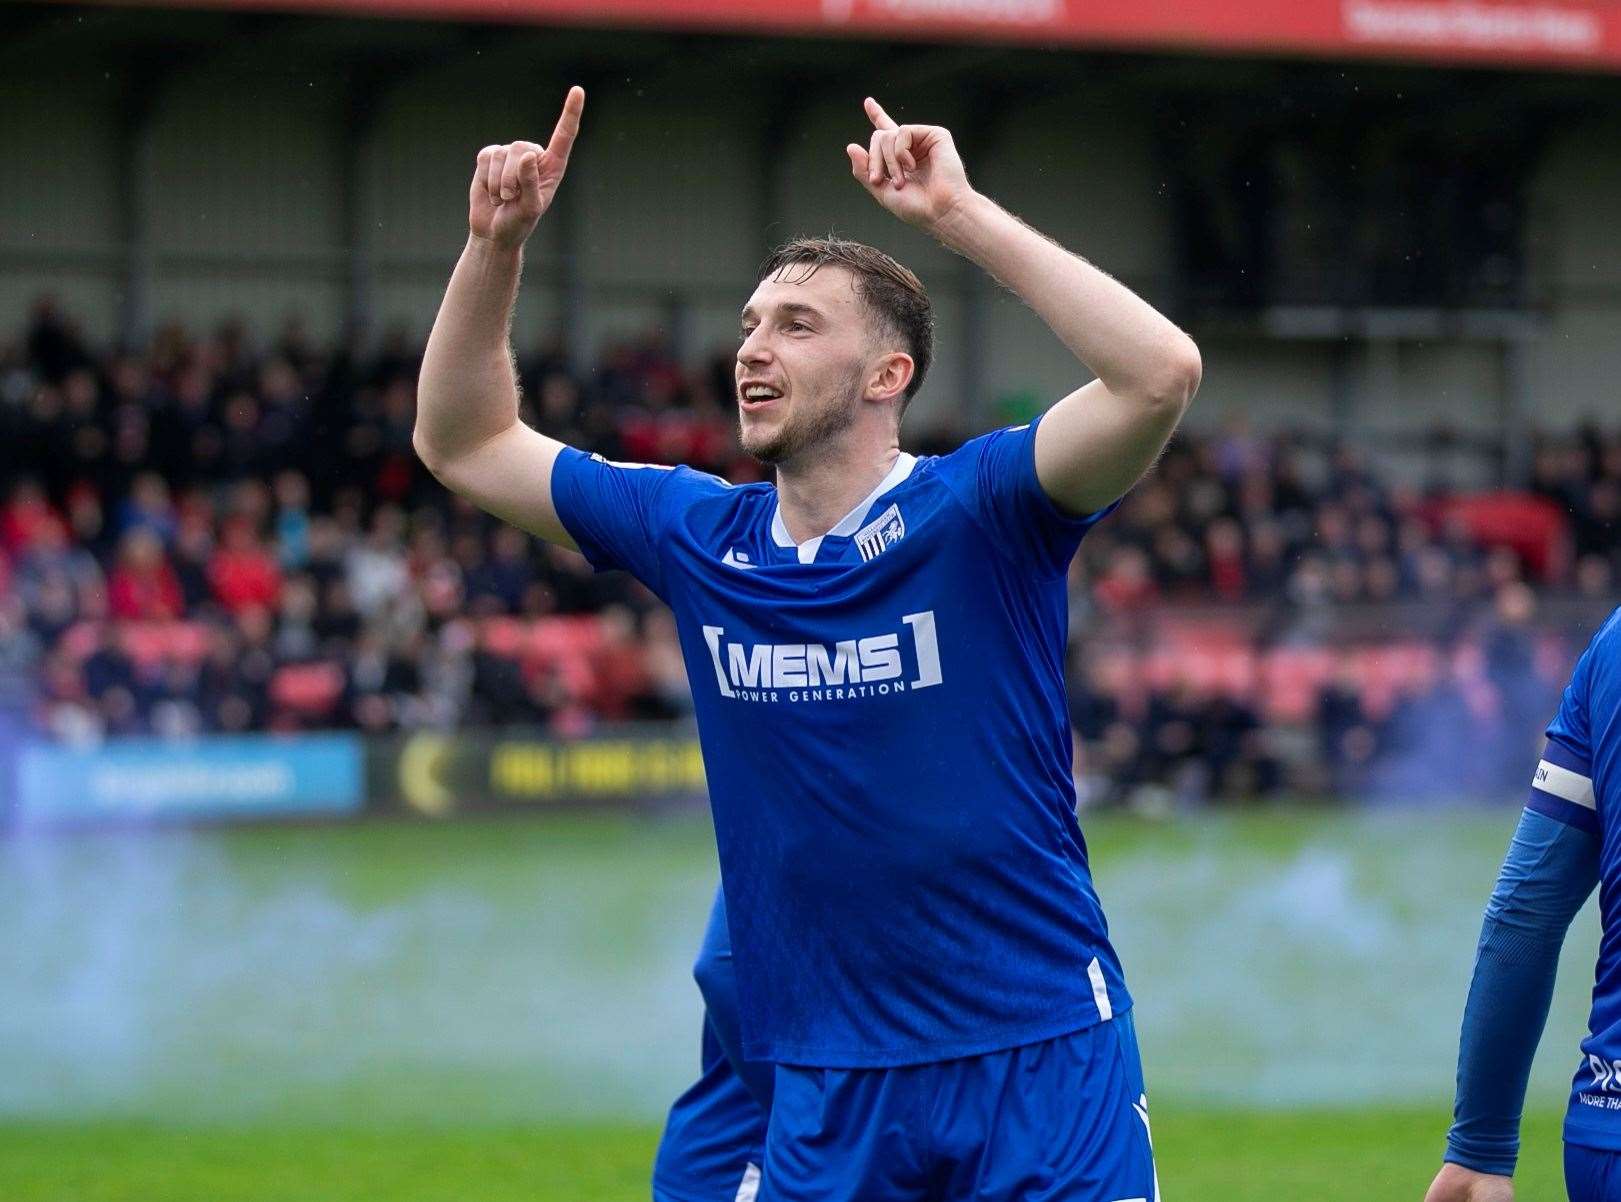 Conor Masterson celebrating Gillingham’s goal at Salford infront of the away fans